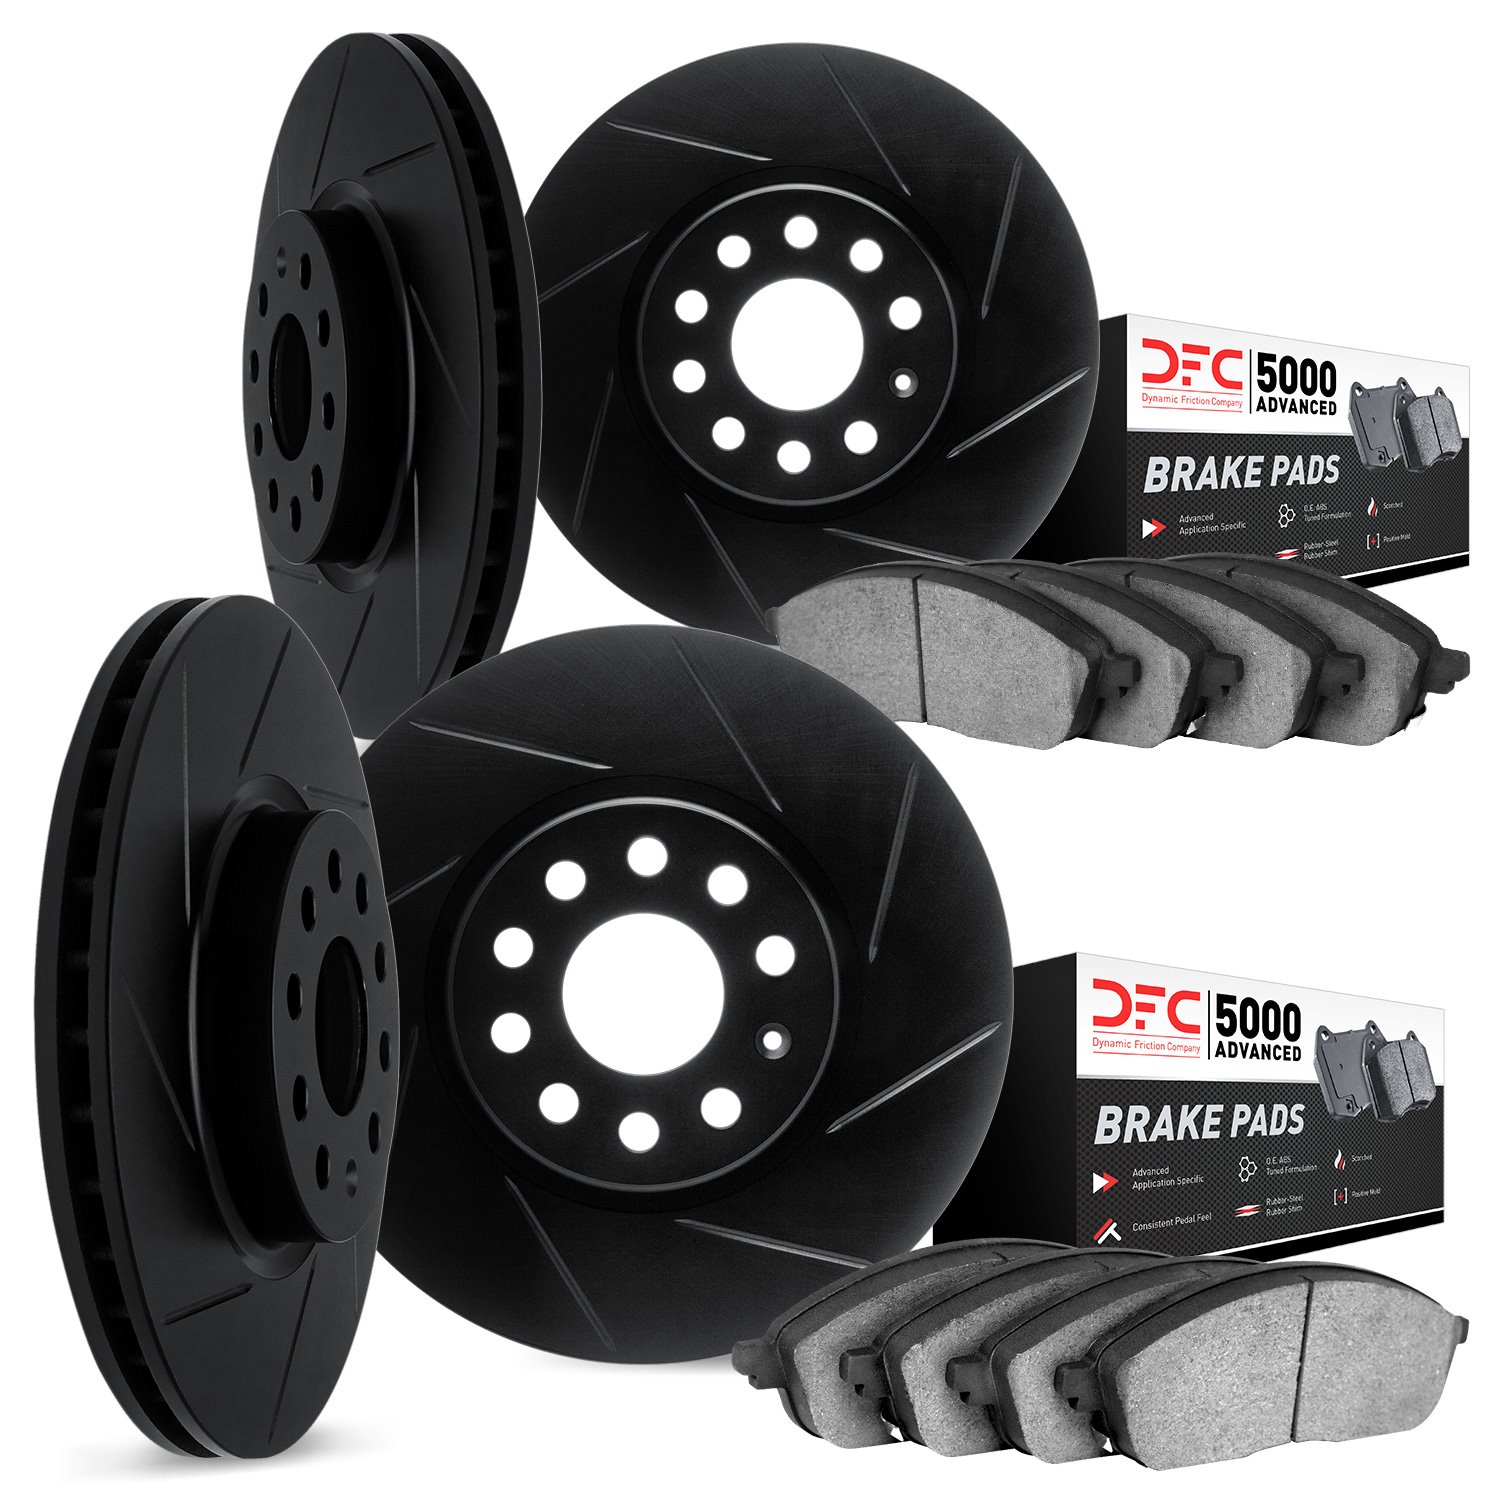 3514-63107 Slotted Brake Rotors w/5000 Advanced Brake Pads Kit & Hardware [Black], 2006-2012 Mercedes-Benz, Position: Front and